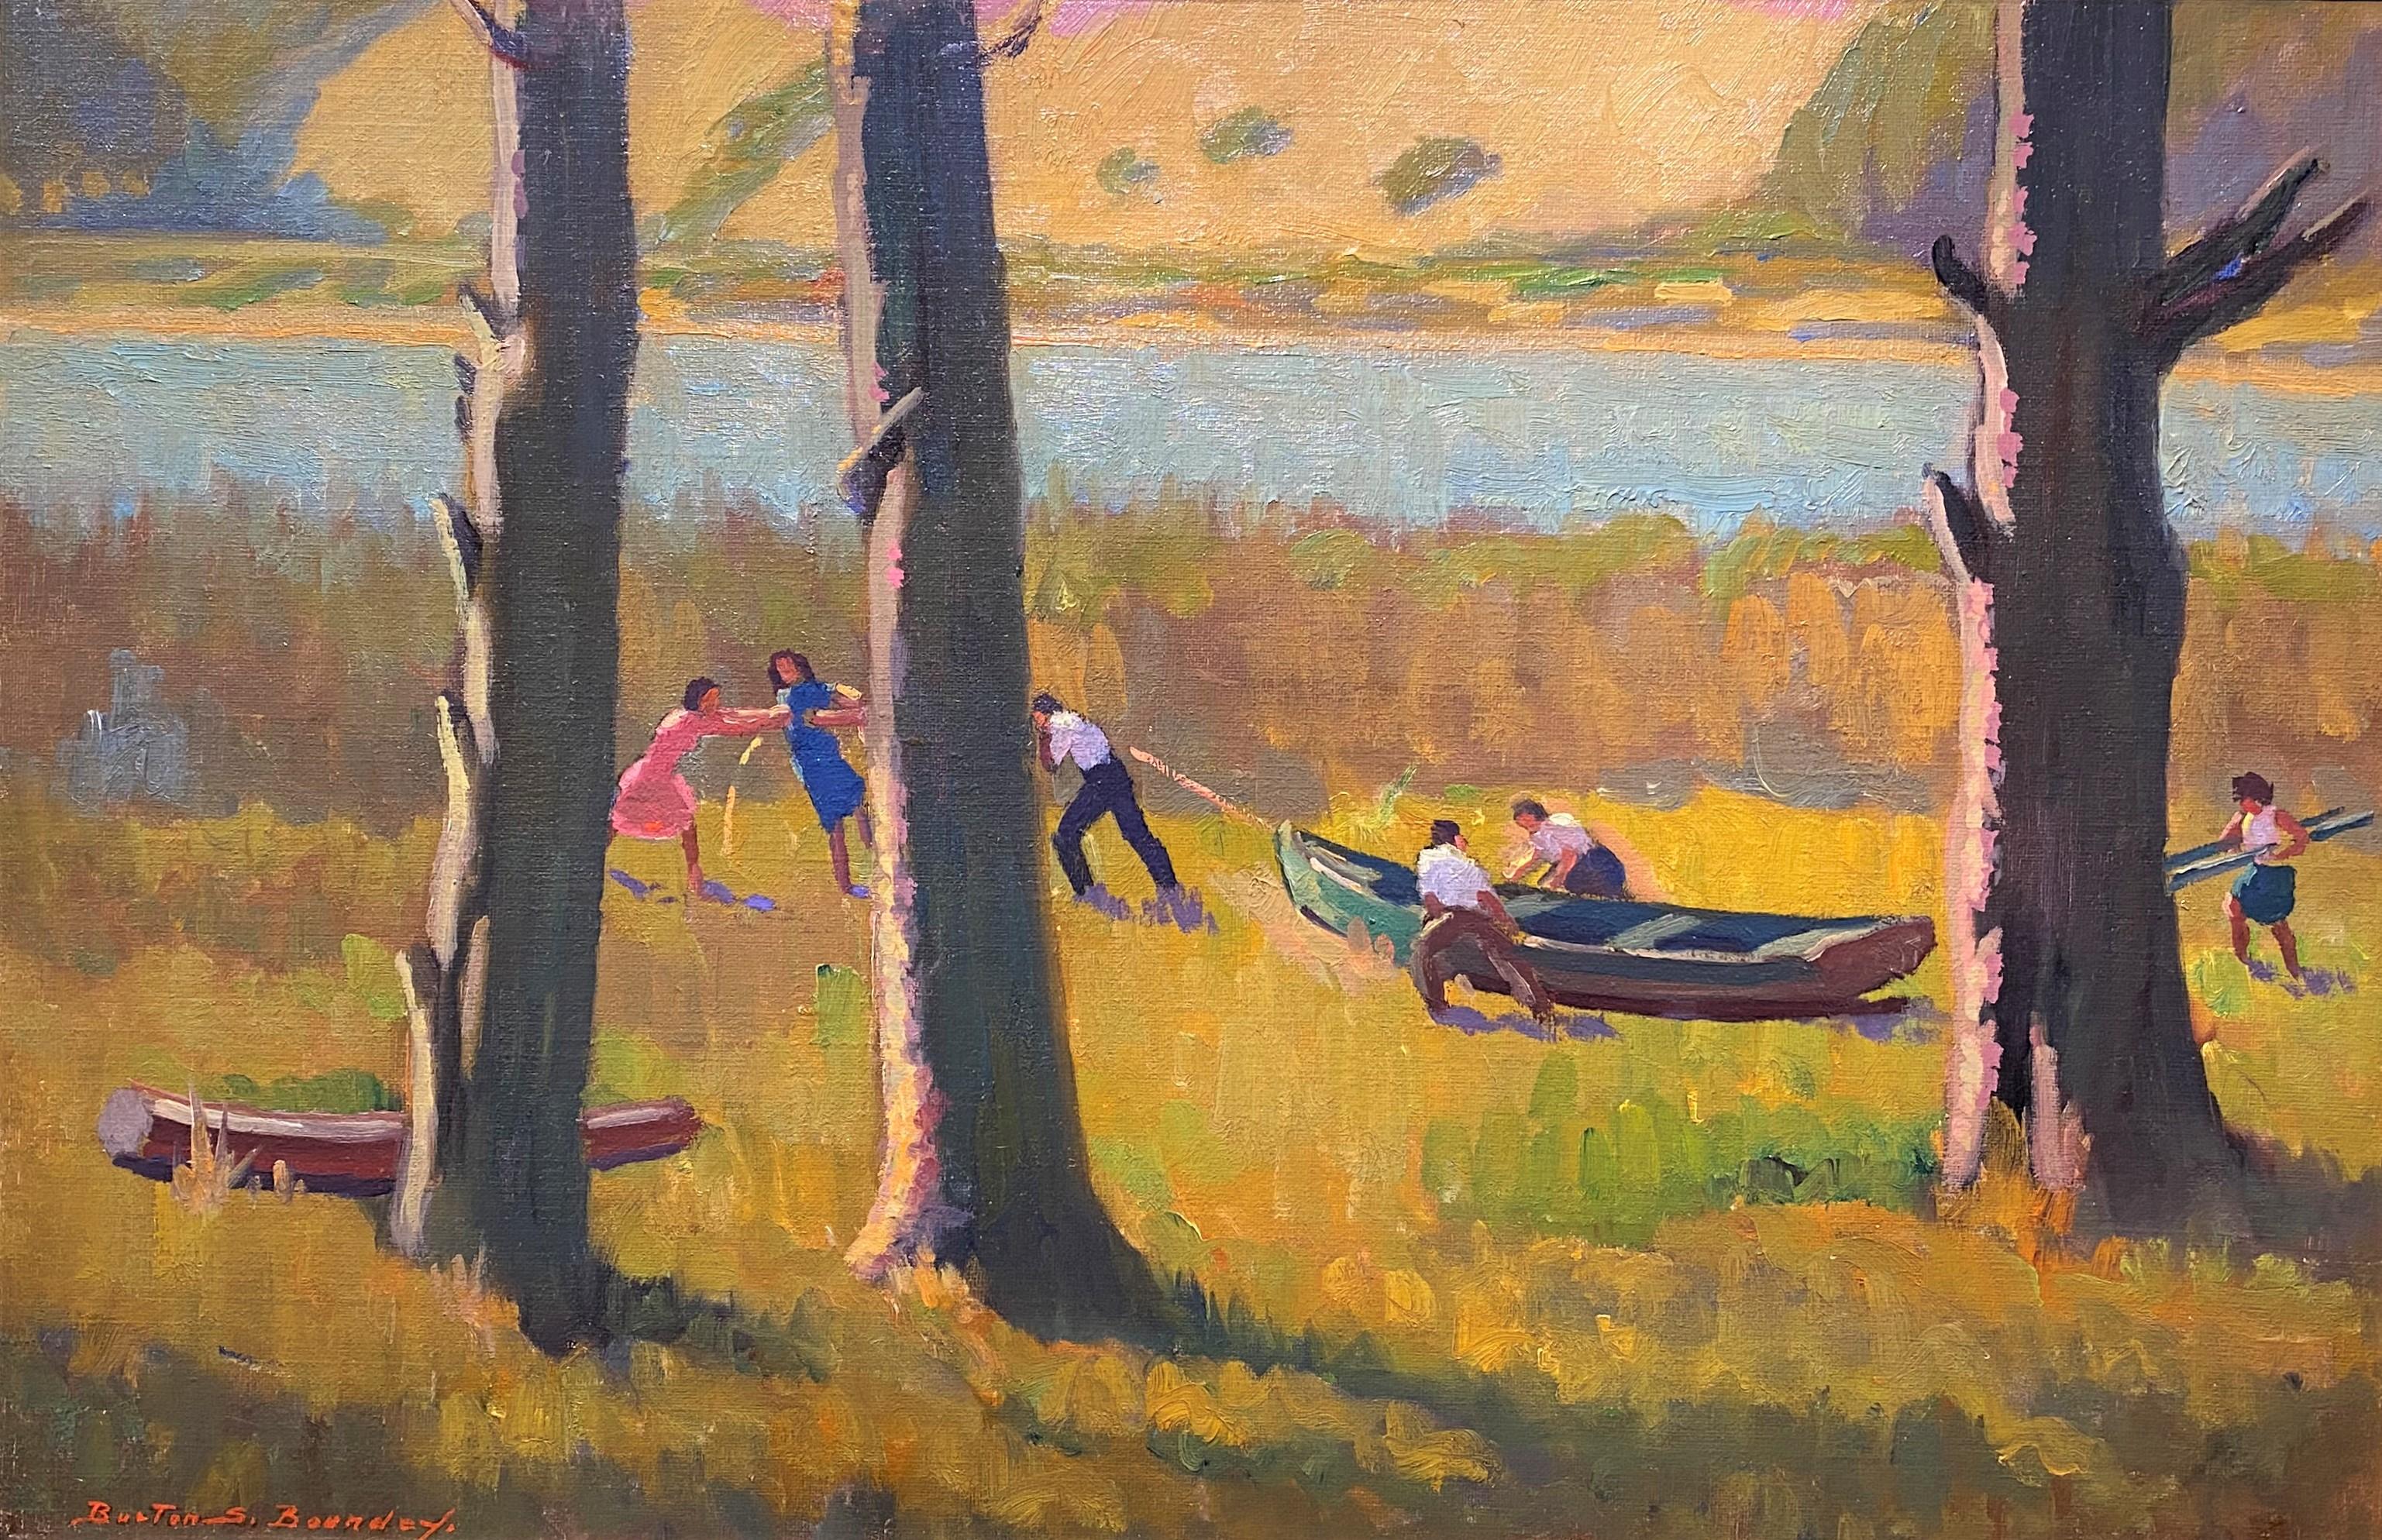 Bringing Out The Boat - Painting by Burton S. Boundey